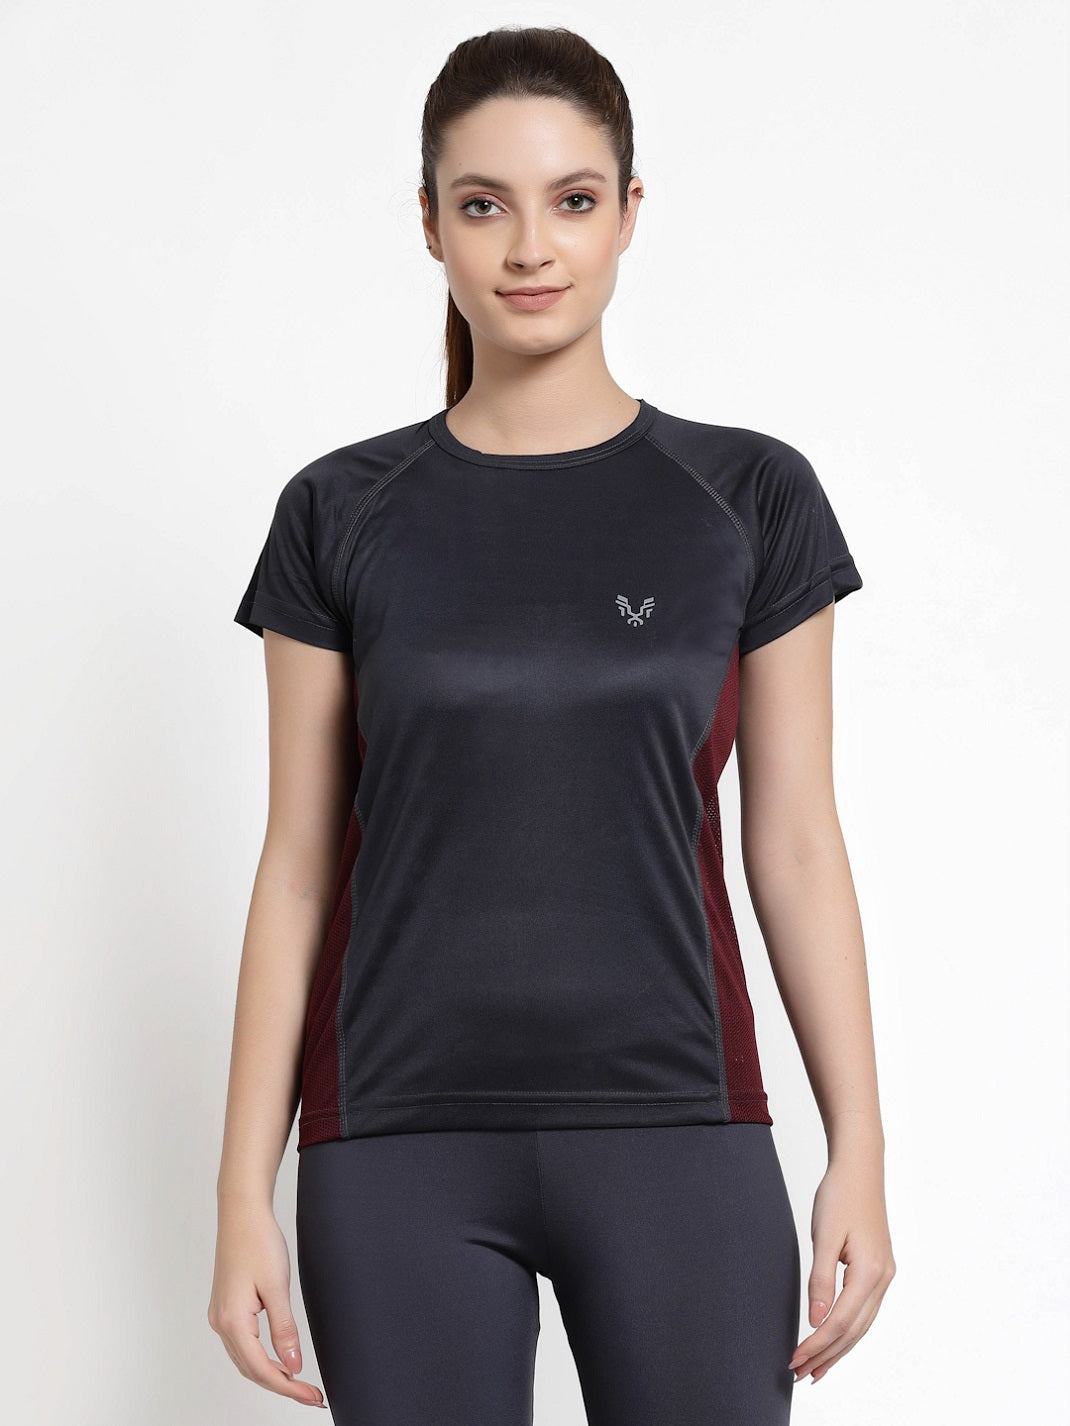 Best Oversized Workout And Gym T-Shirts For Women 2023 • The Sport Review